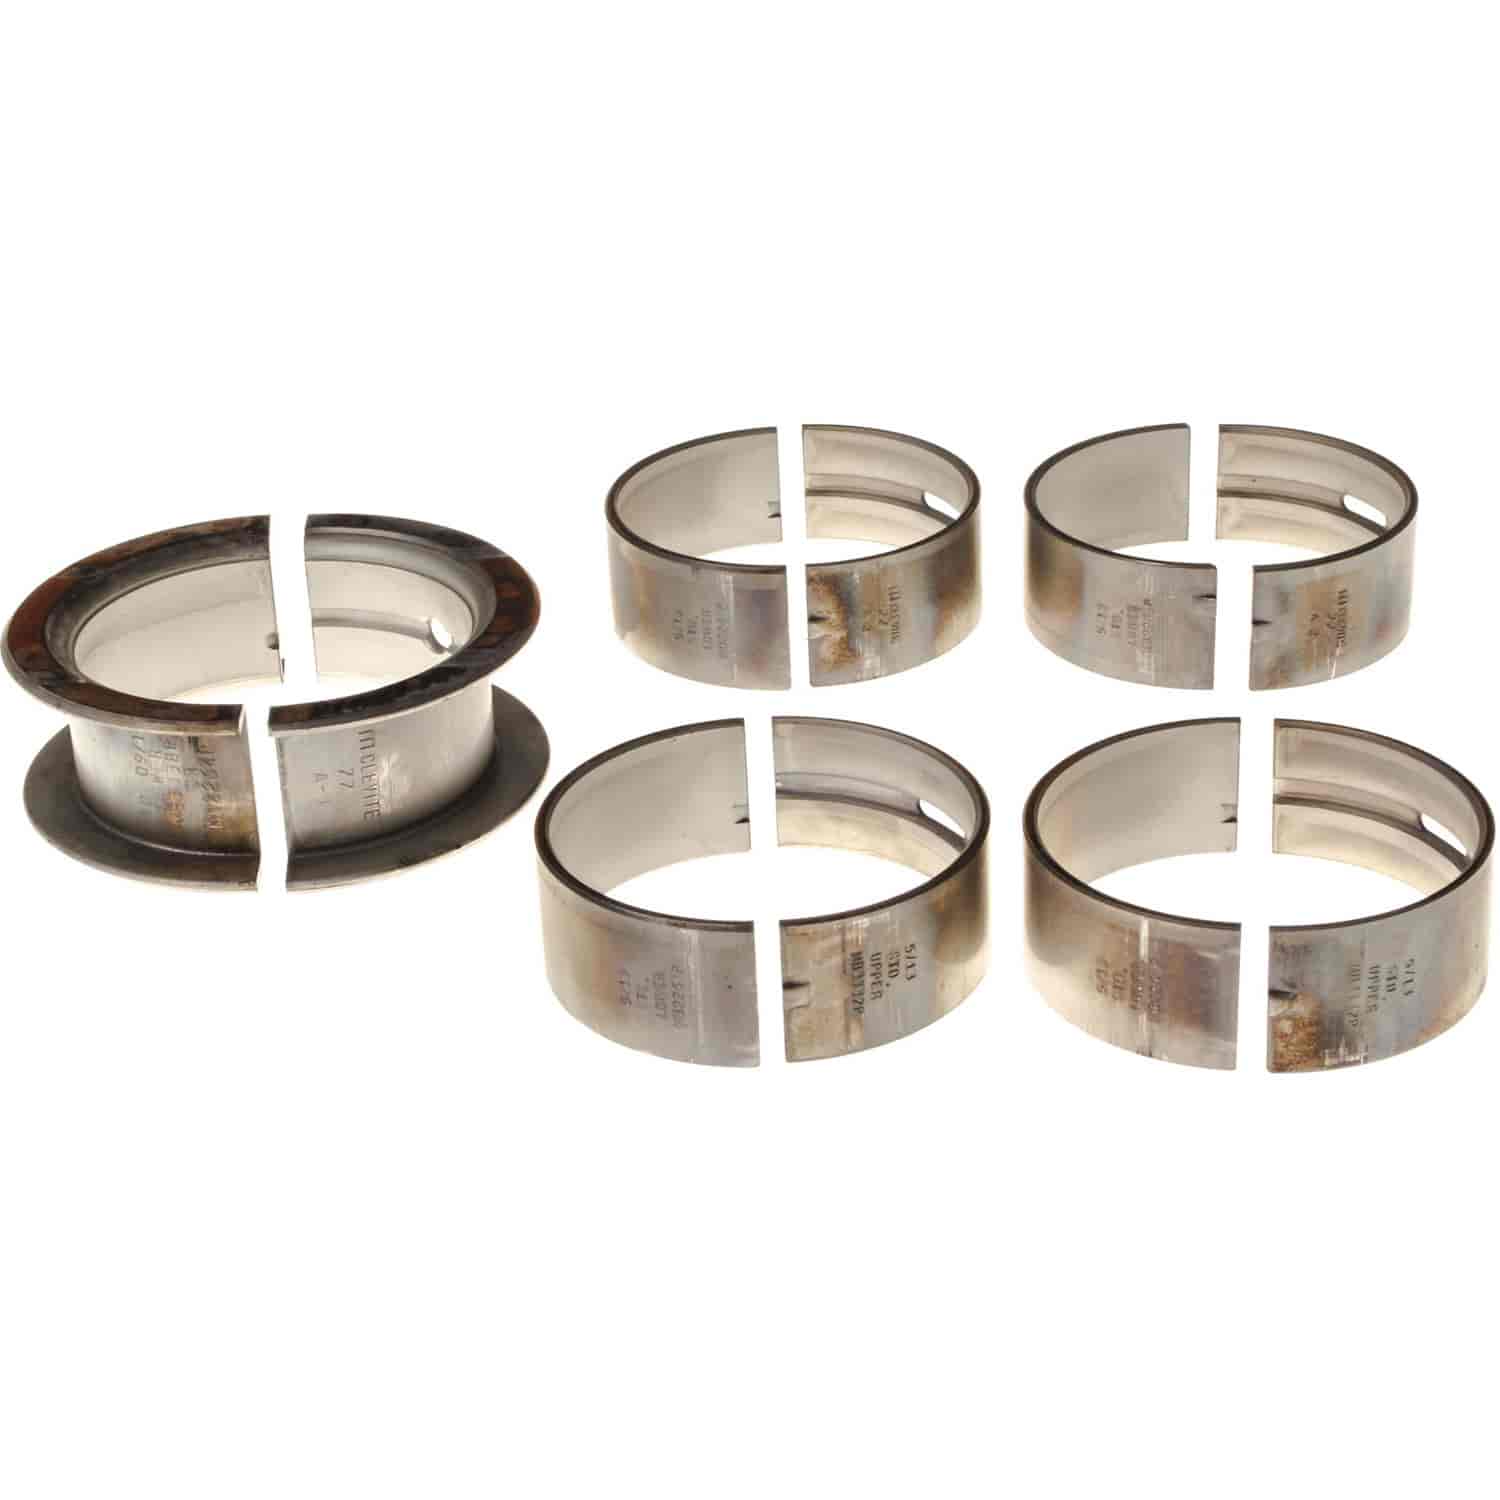 Main Bearing Set Chrysler/Jeep 1991-2002 L4 2.5L with Standard Size